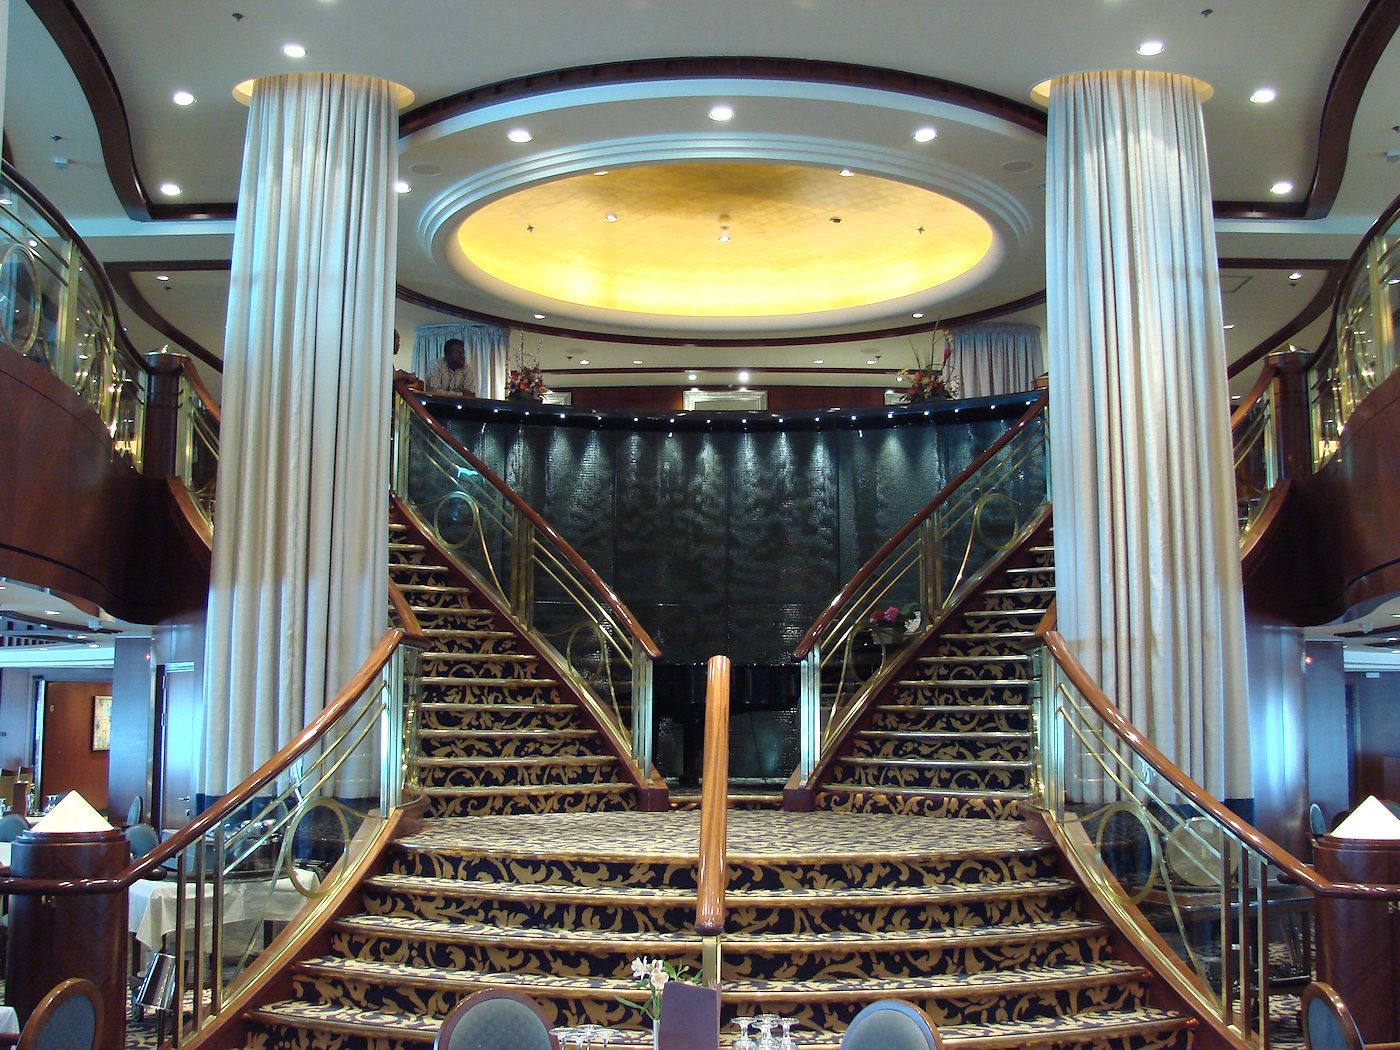 Radiance of the Seas Cascades dining room entrance